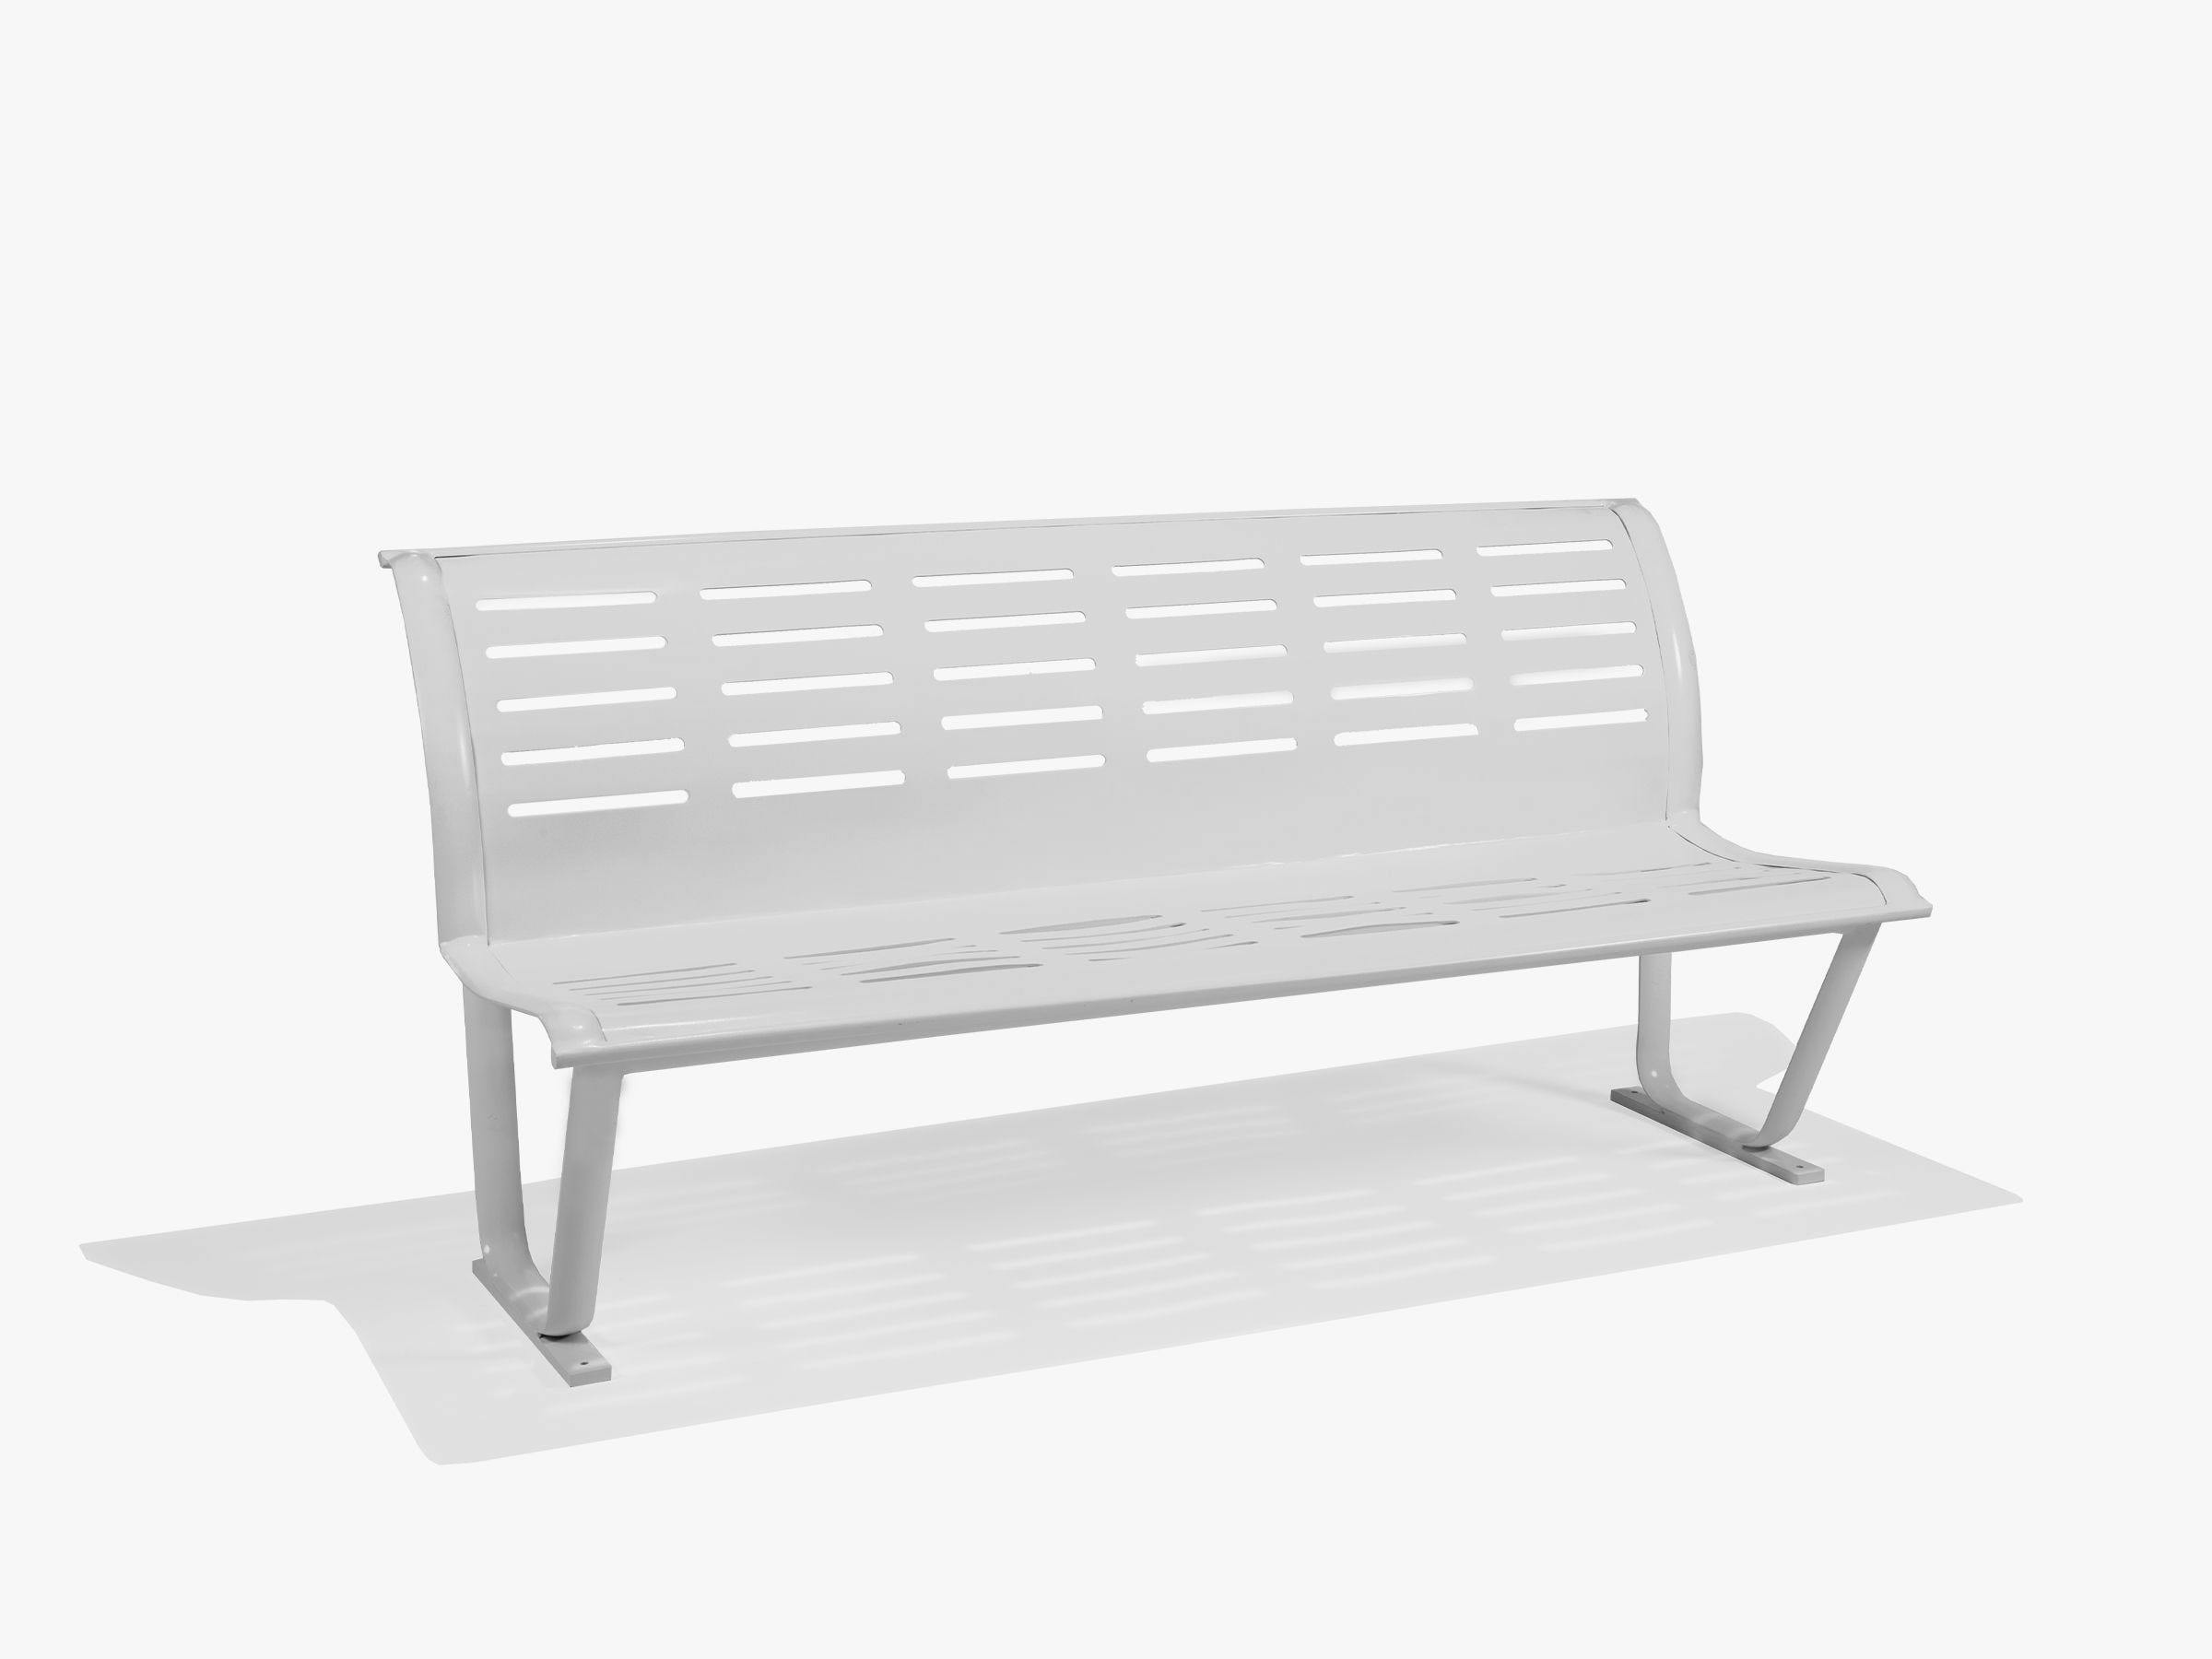 6' Bench with Back No Arms